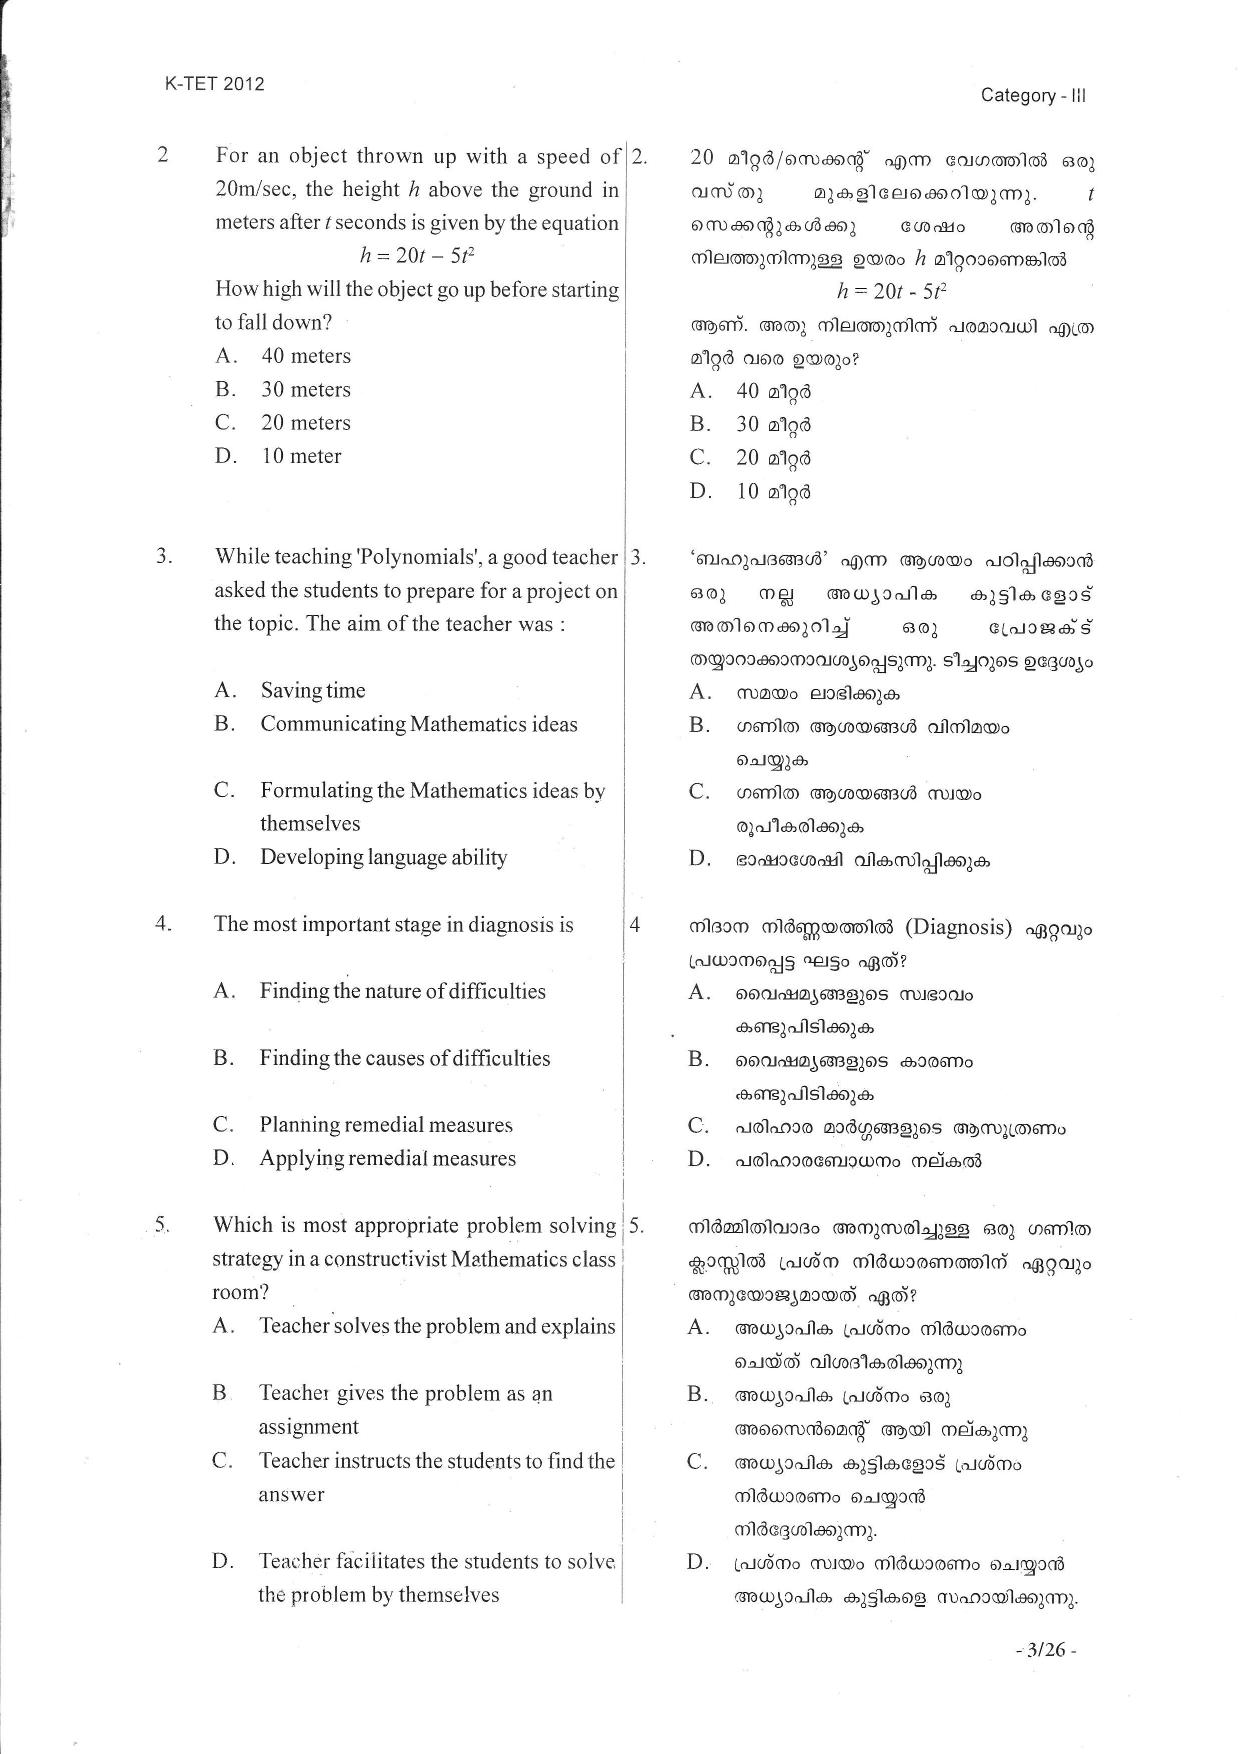 KTET Category III High School Teacher (8 to 10) Exam Previous Papers - Page 26